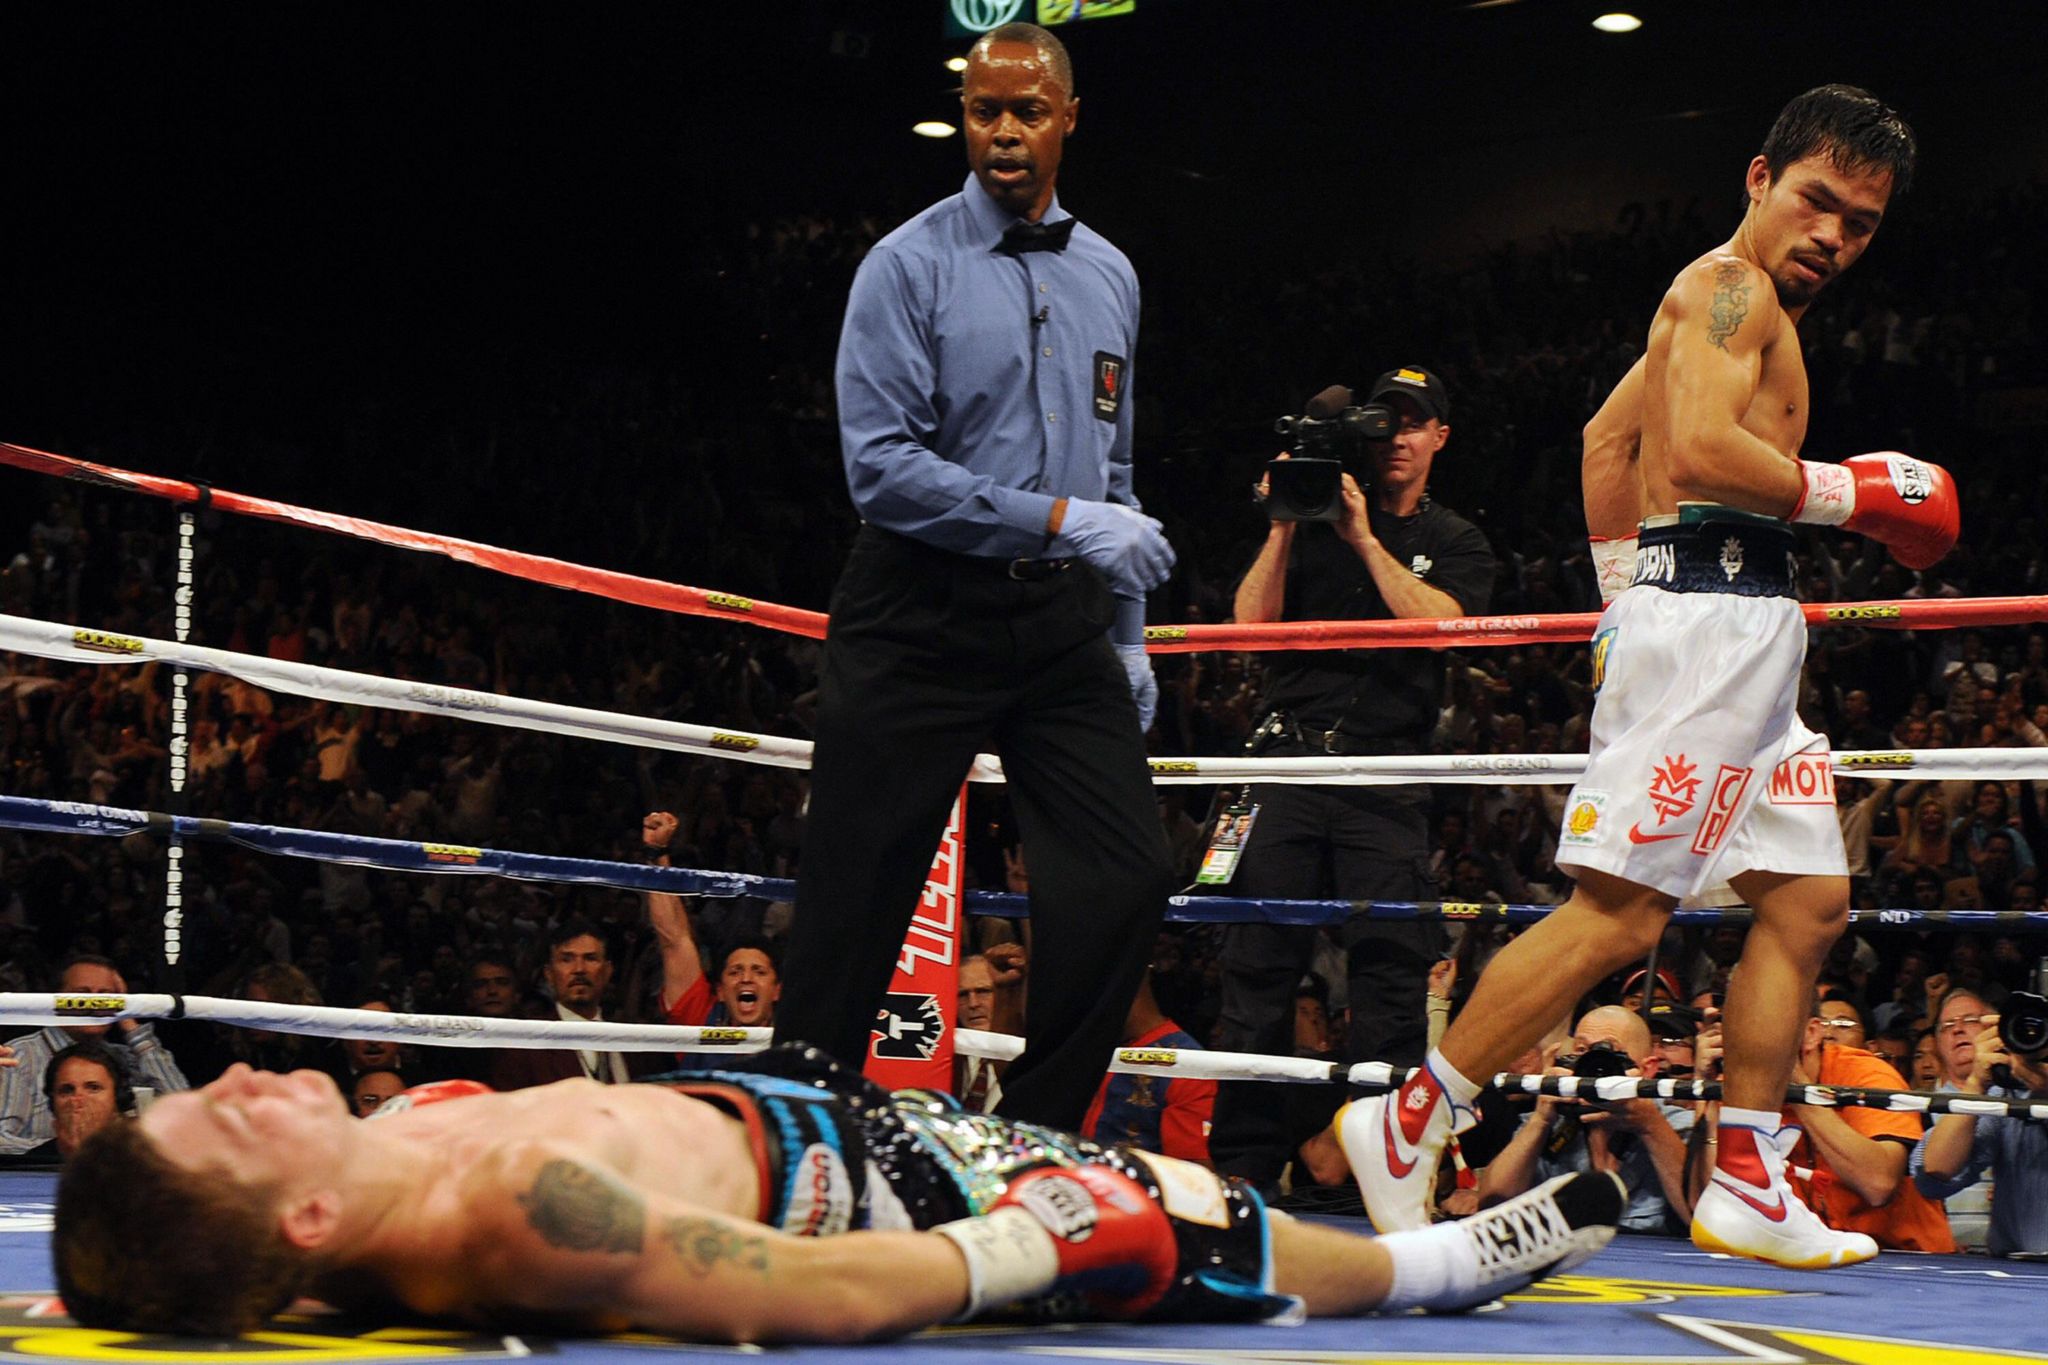 Ricky Hatton lies on the canvas watched over by the referee and Manny Pacquiao